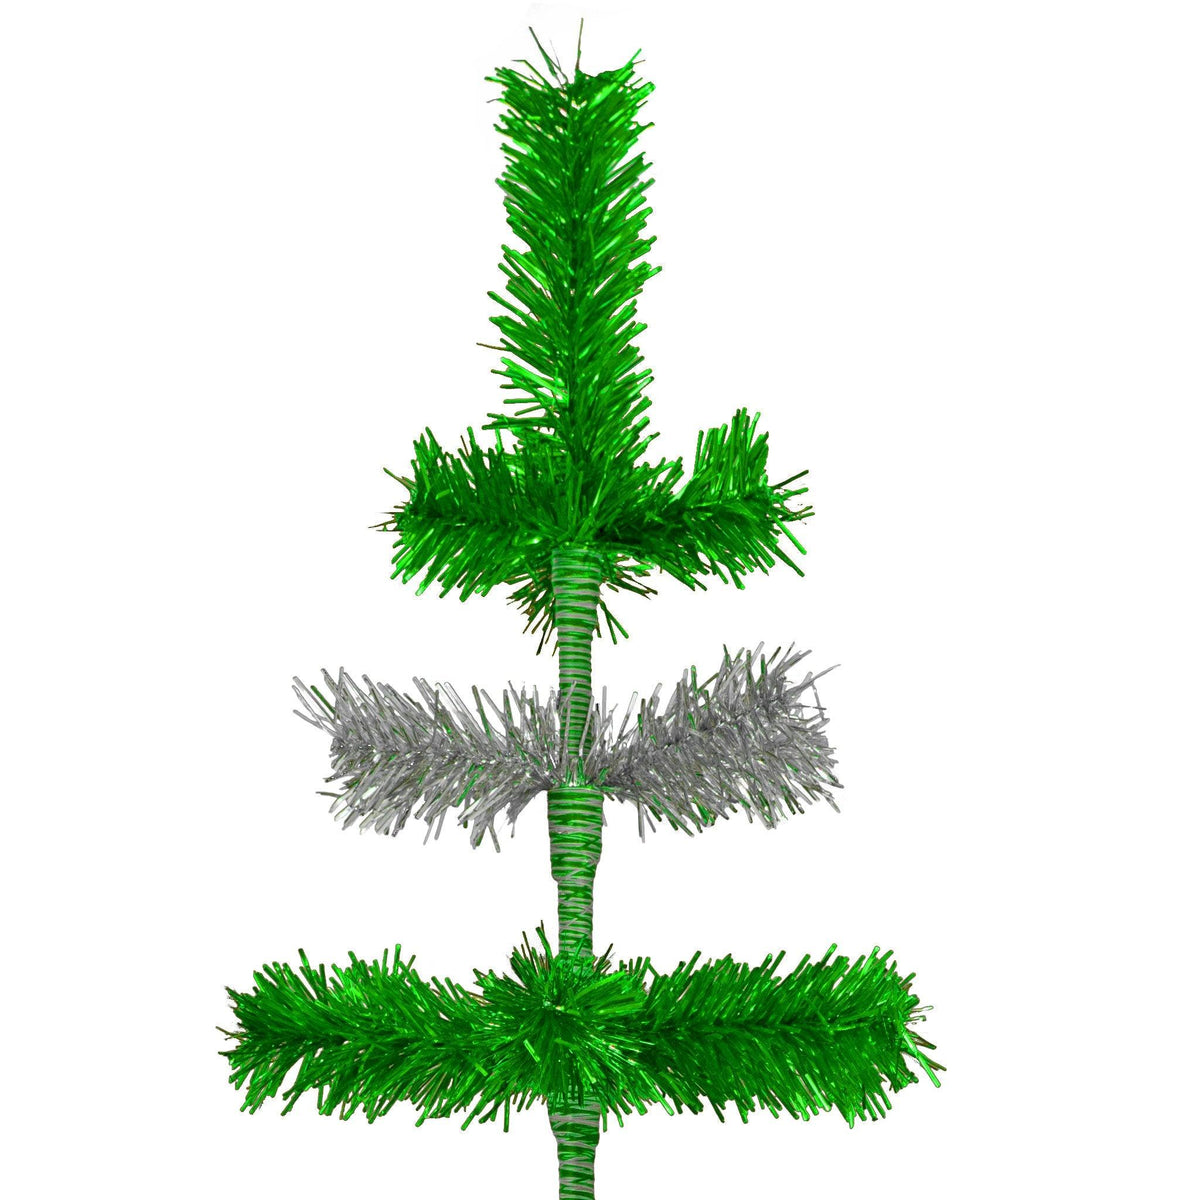 48in Tall Shiny Green and Metallic Silver Layered Tinsel Christmas Trees on sale at leedisplay.com